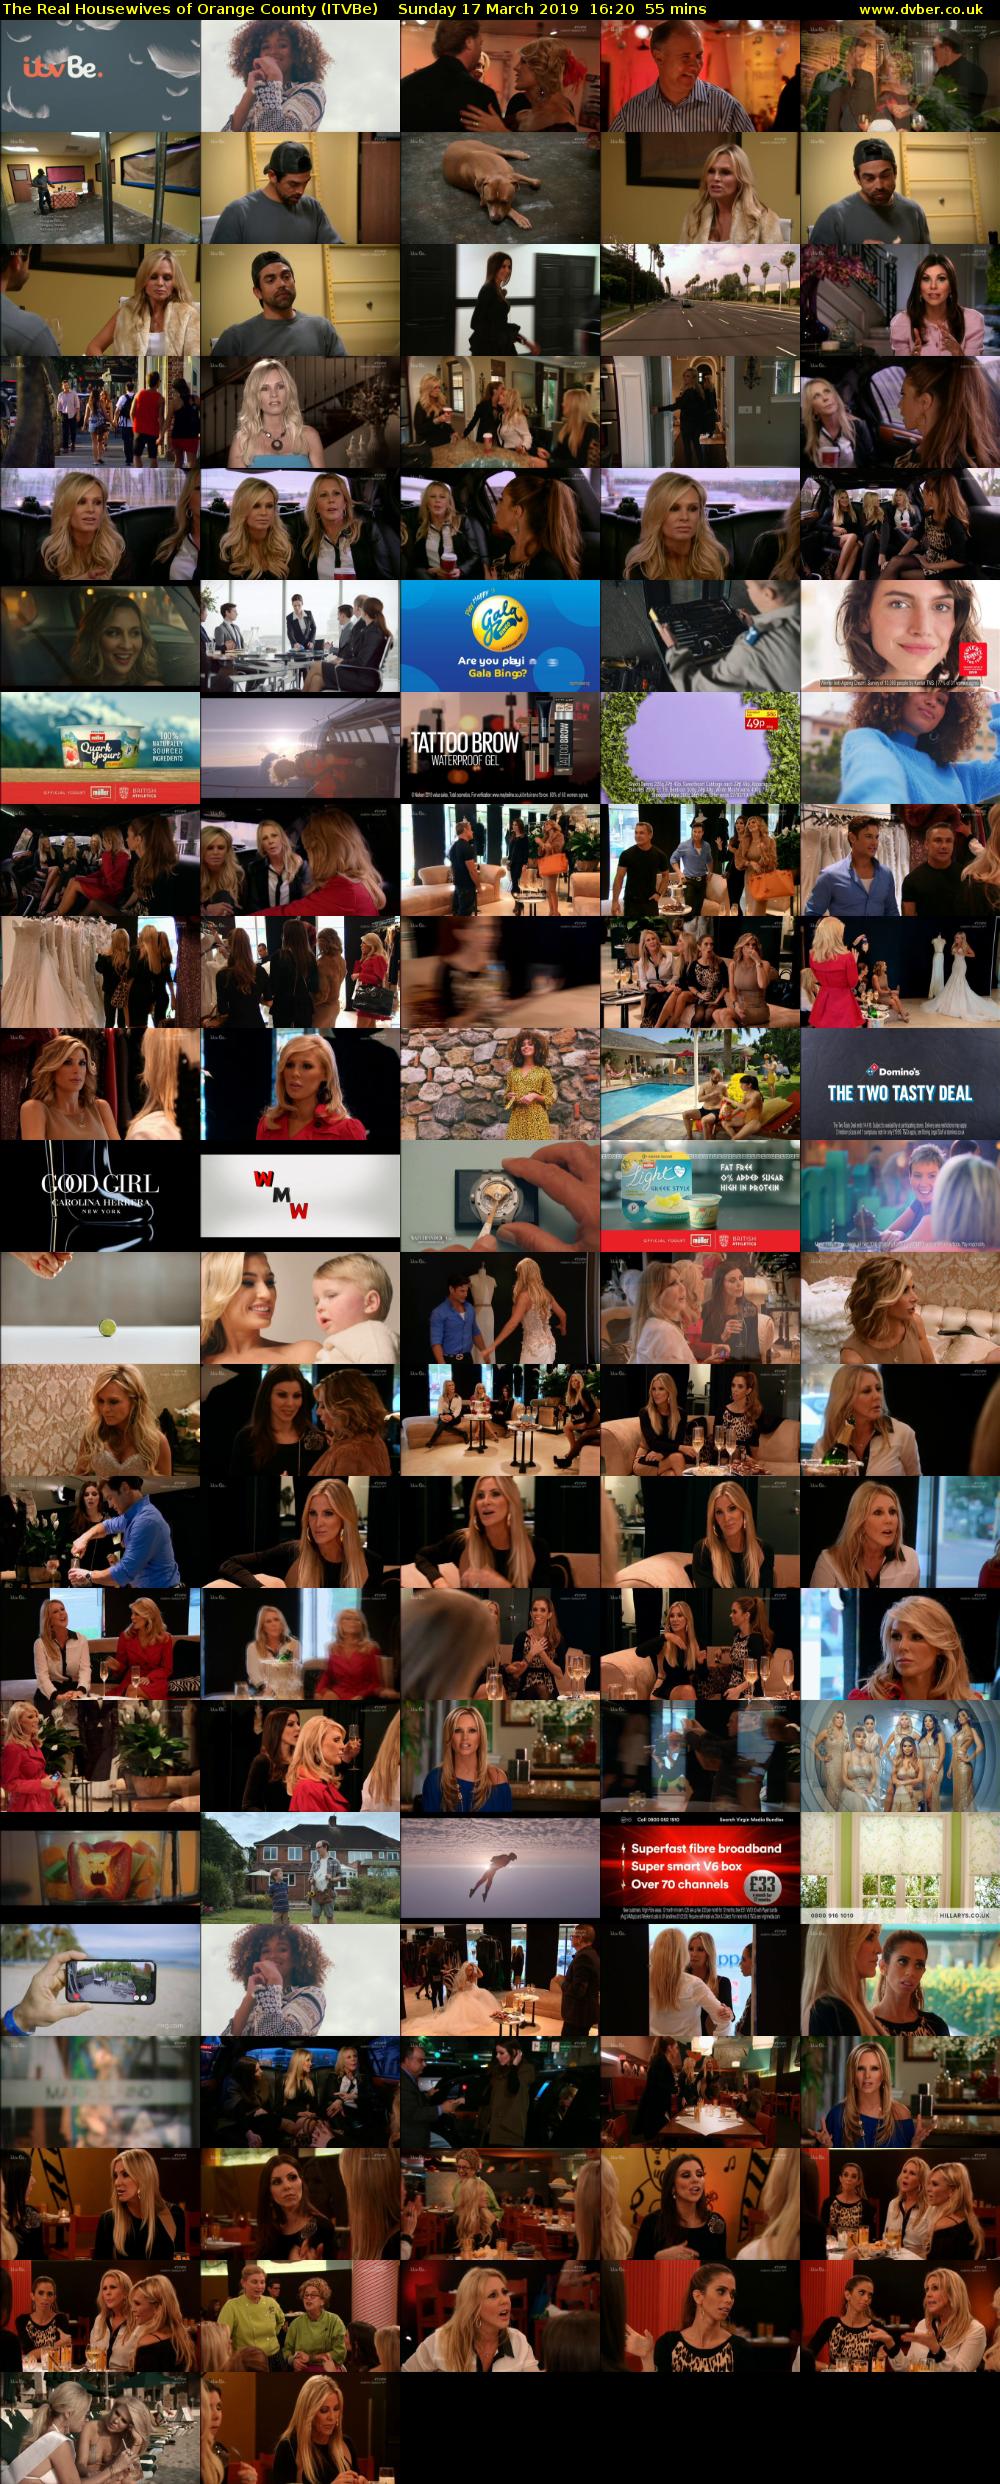 The Real Housewives of Orange County (ITVBe) Sunday 17 March 2019 16:20 - 17:15